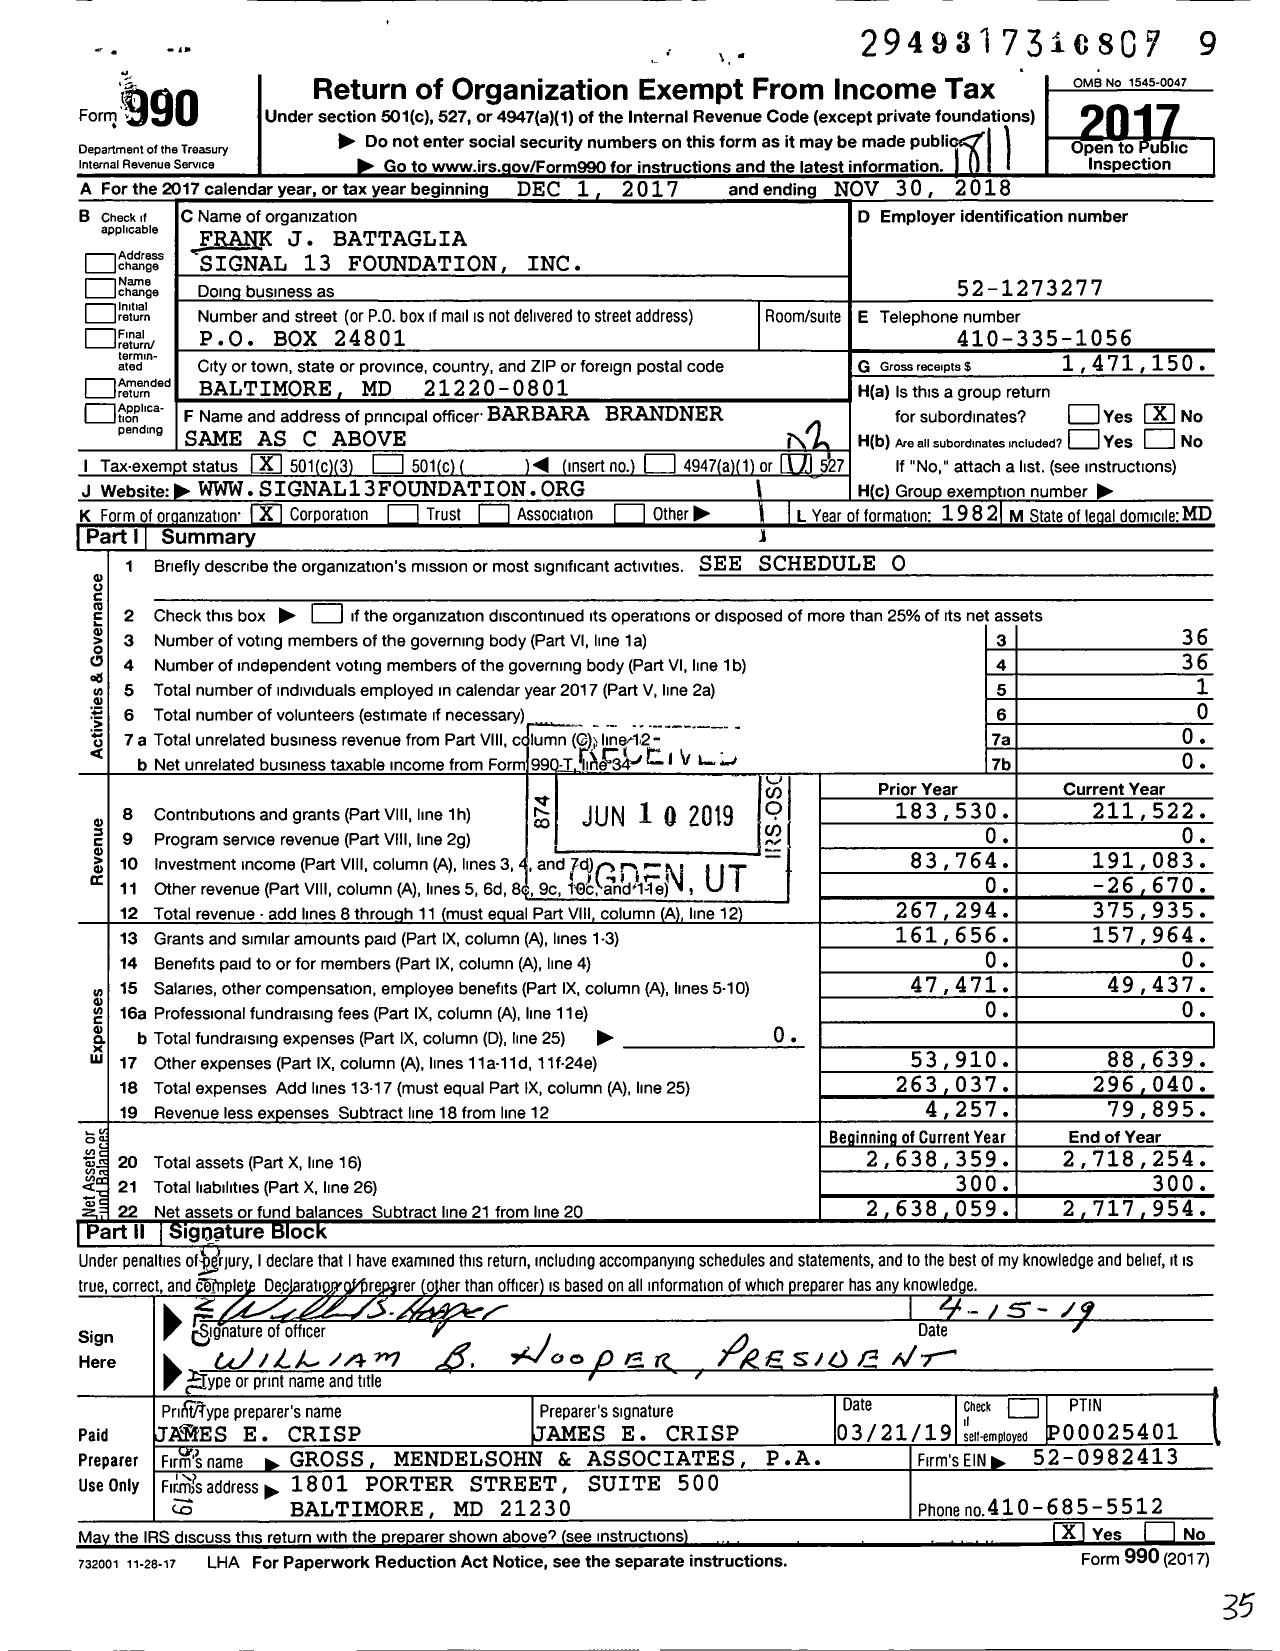 Image of first page of 2017 Form 990 for Frank J Battaglia Signal 13 Foundation